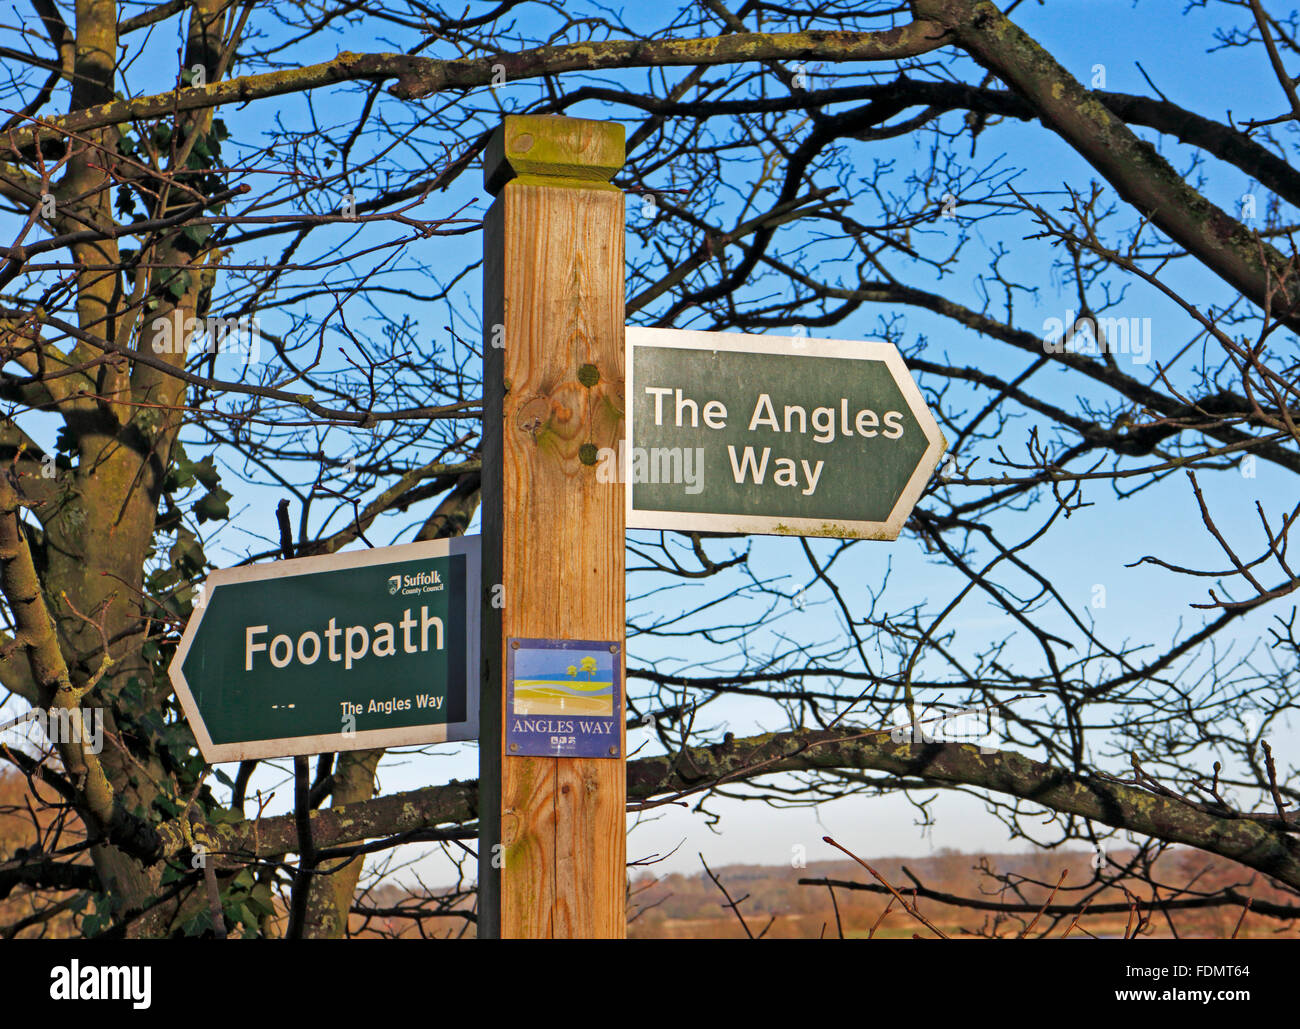 A footpath sign for the Angles Way long distance path near Beccles, Suffolk, England, United Kingdom. Stock Photo